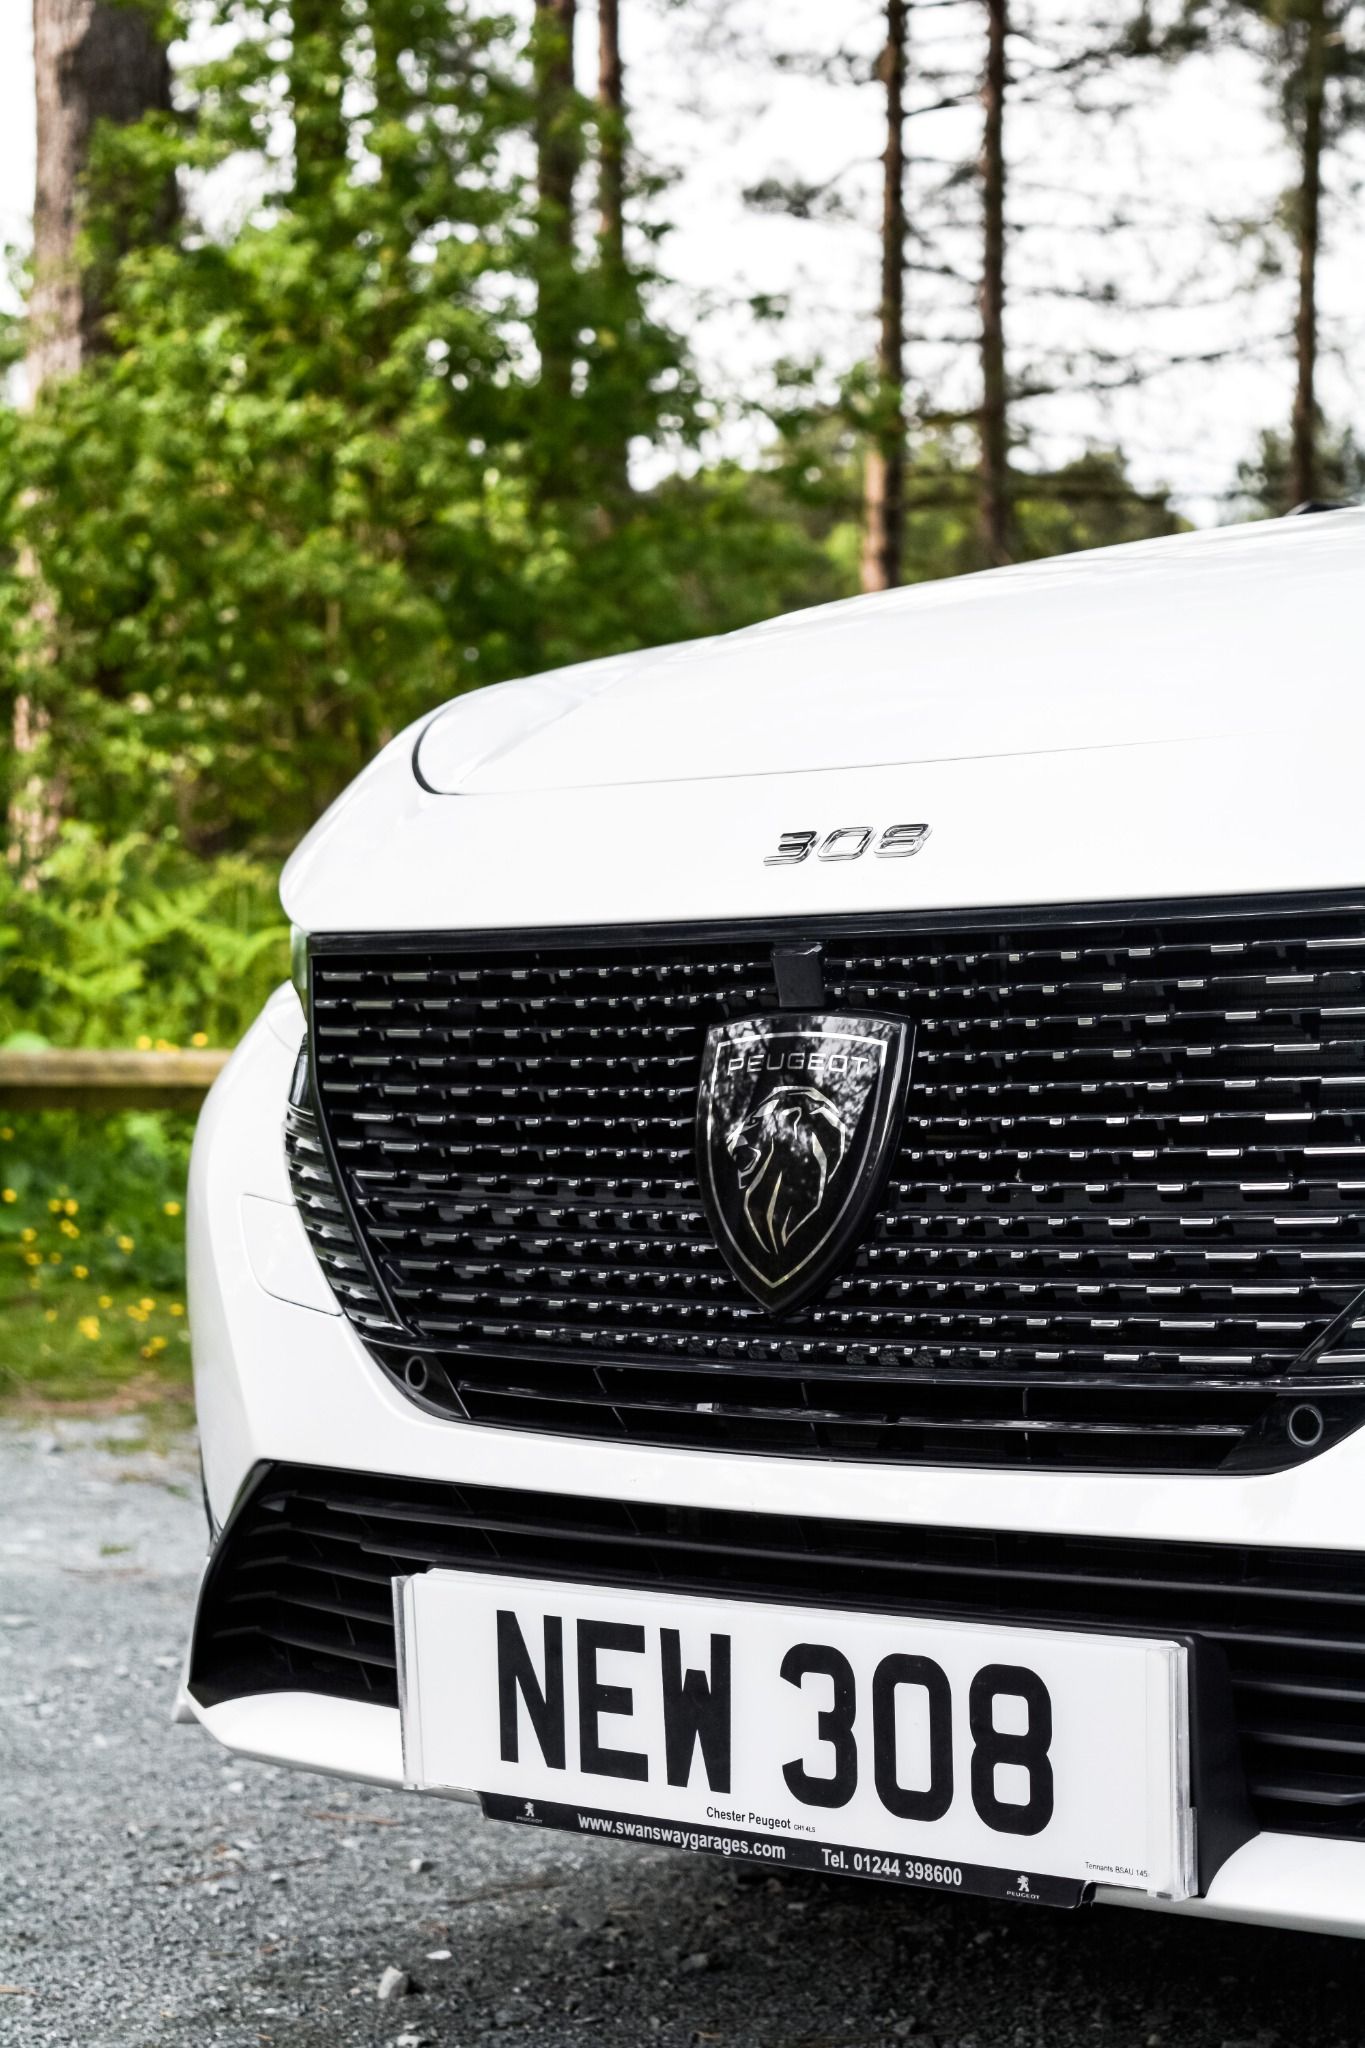 close-up of front grille on Peugeot 308.